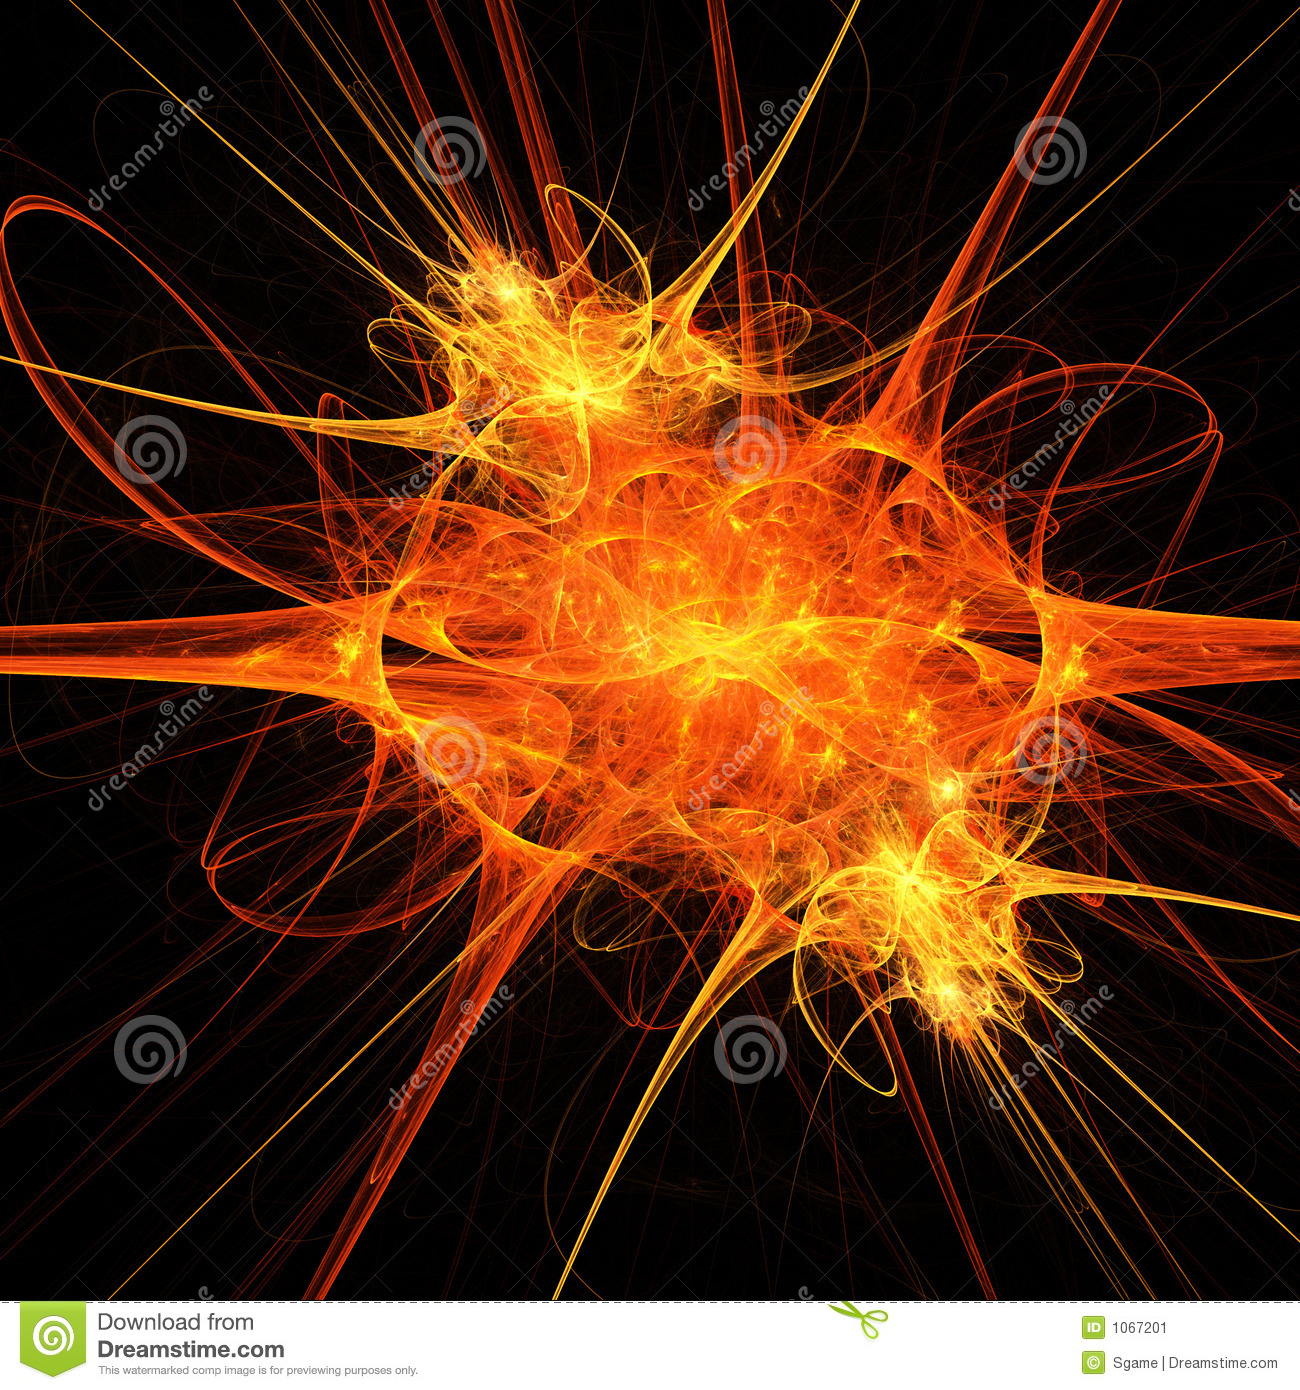 Fire Explosion Stock Image   Image  1067201